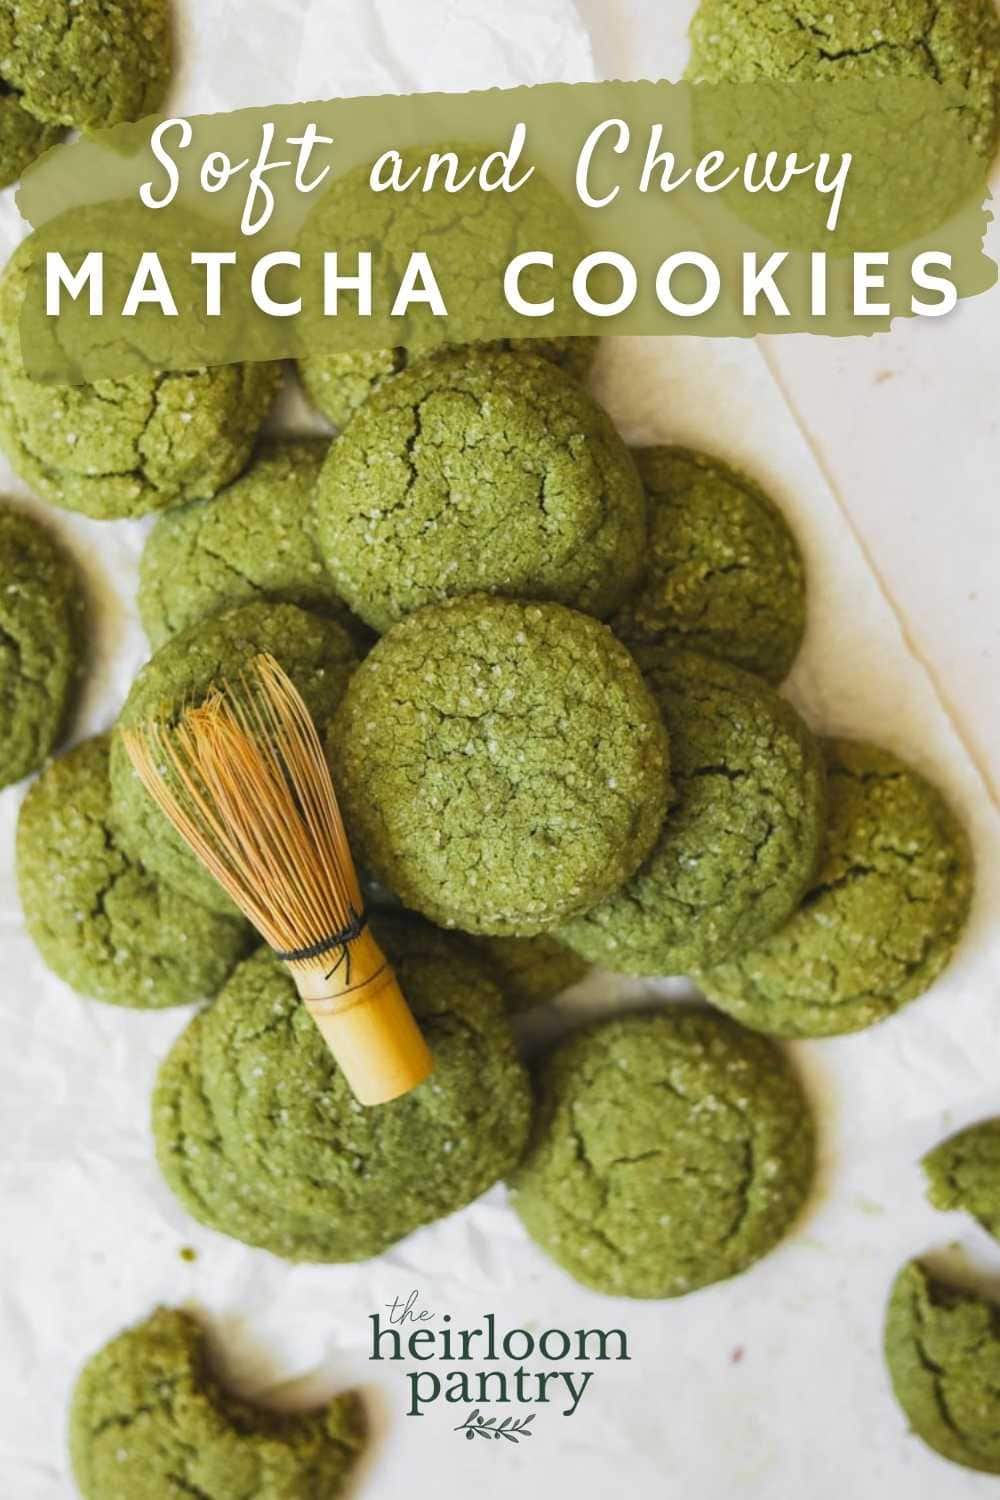 Soft and Chewy Matcha Cookies - The Heirloom Pantry Pinterest